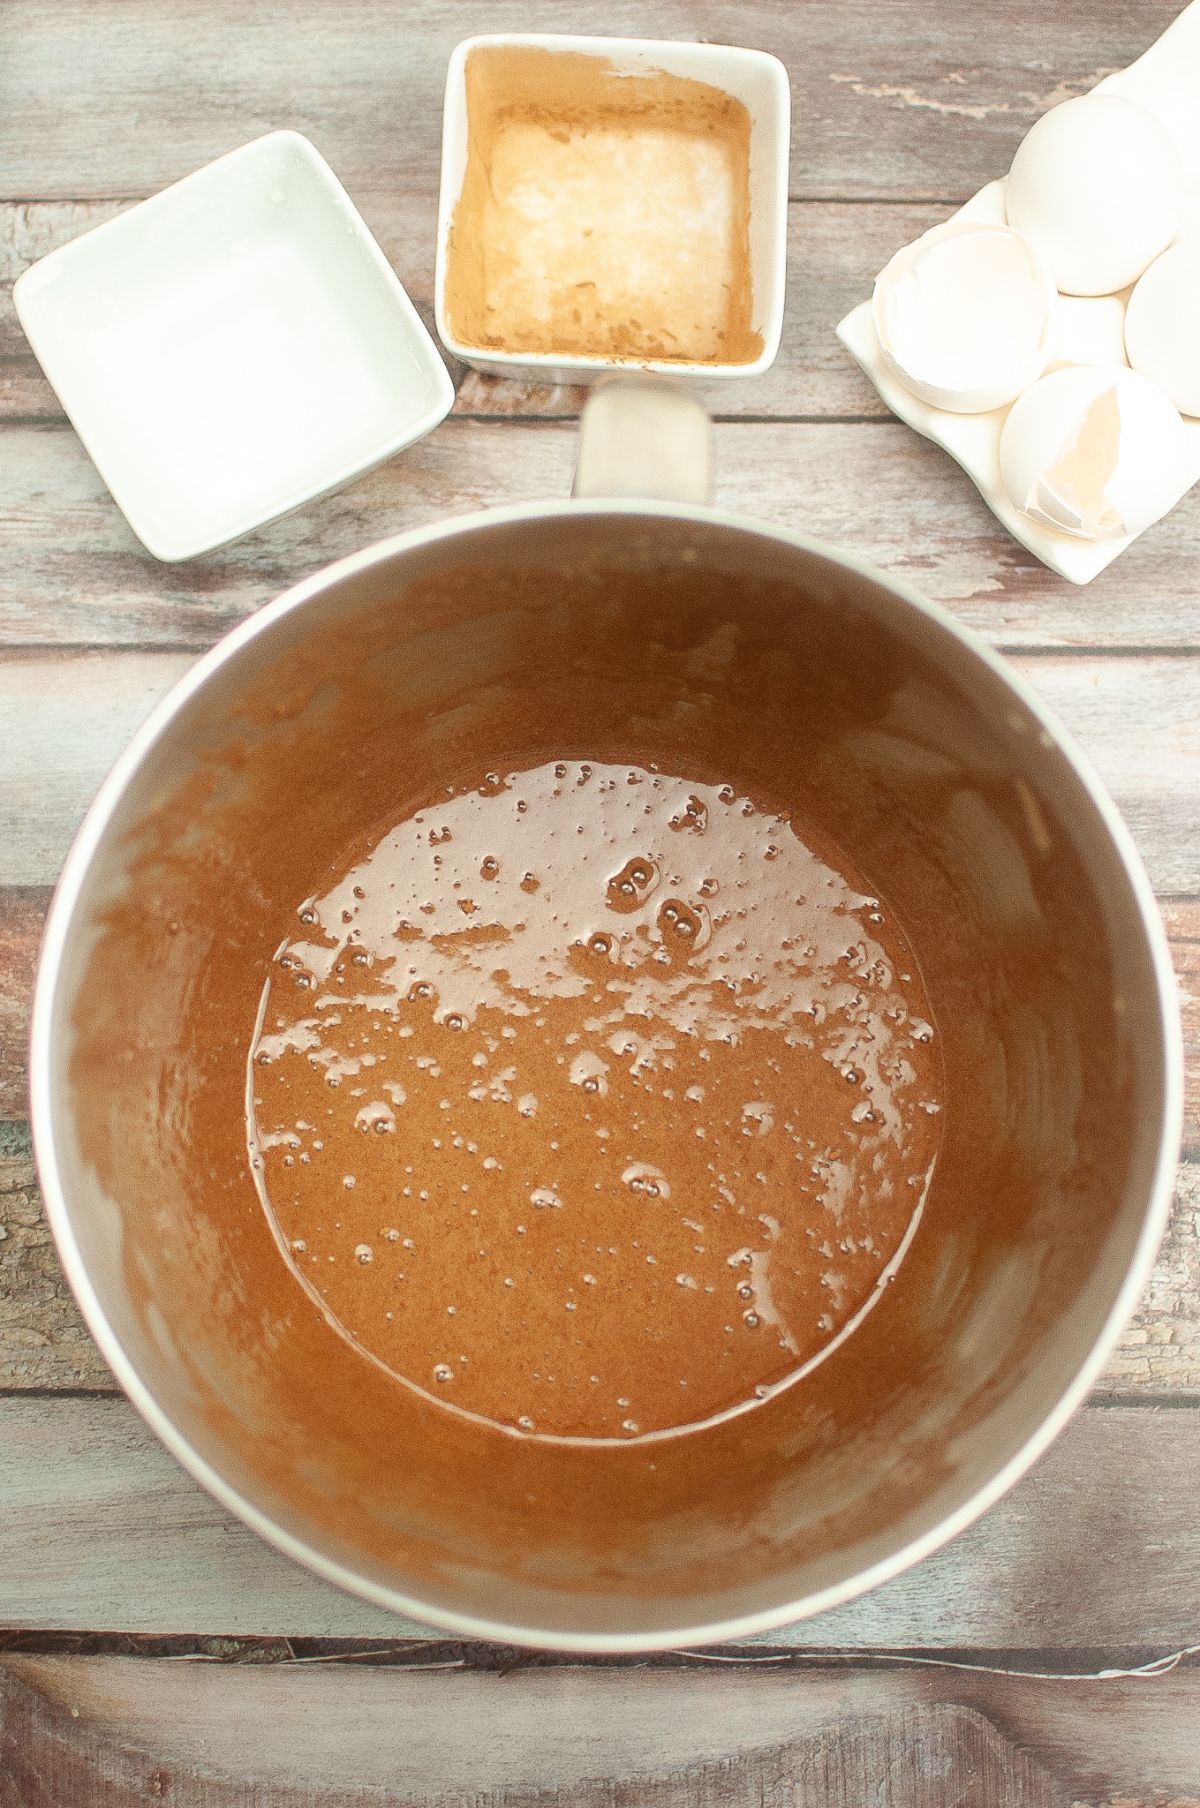 Batter mixture in a mixing bowl.